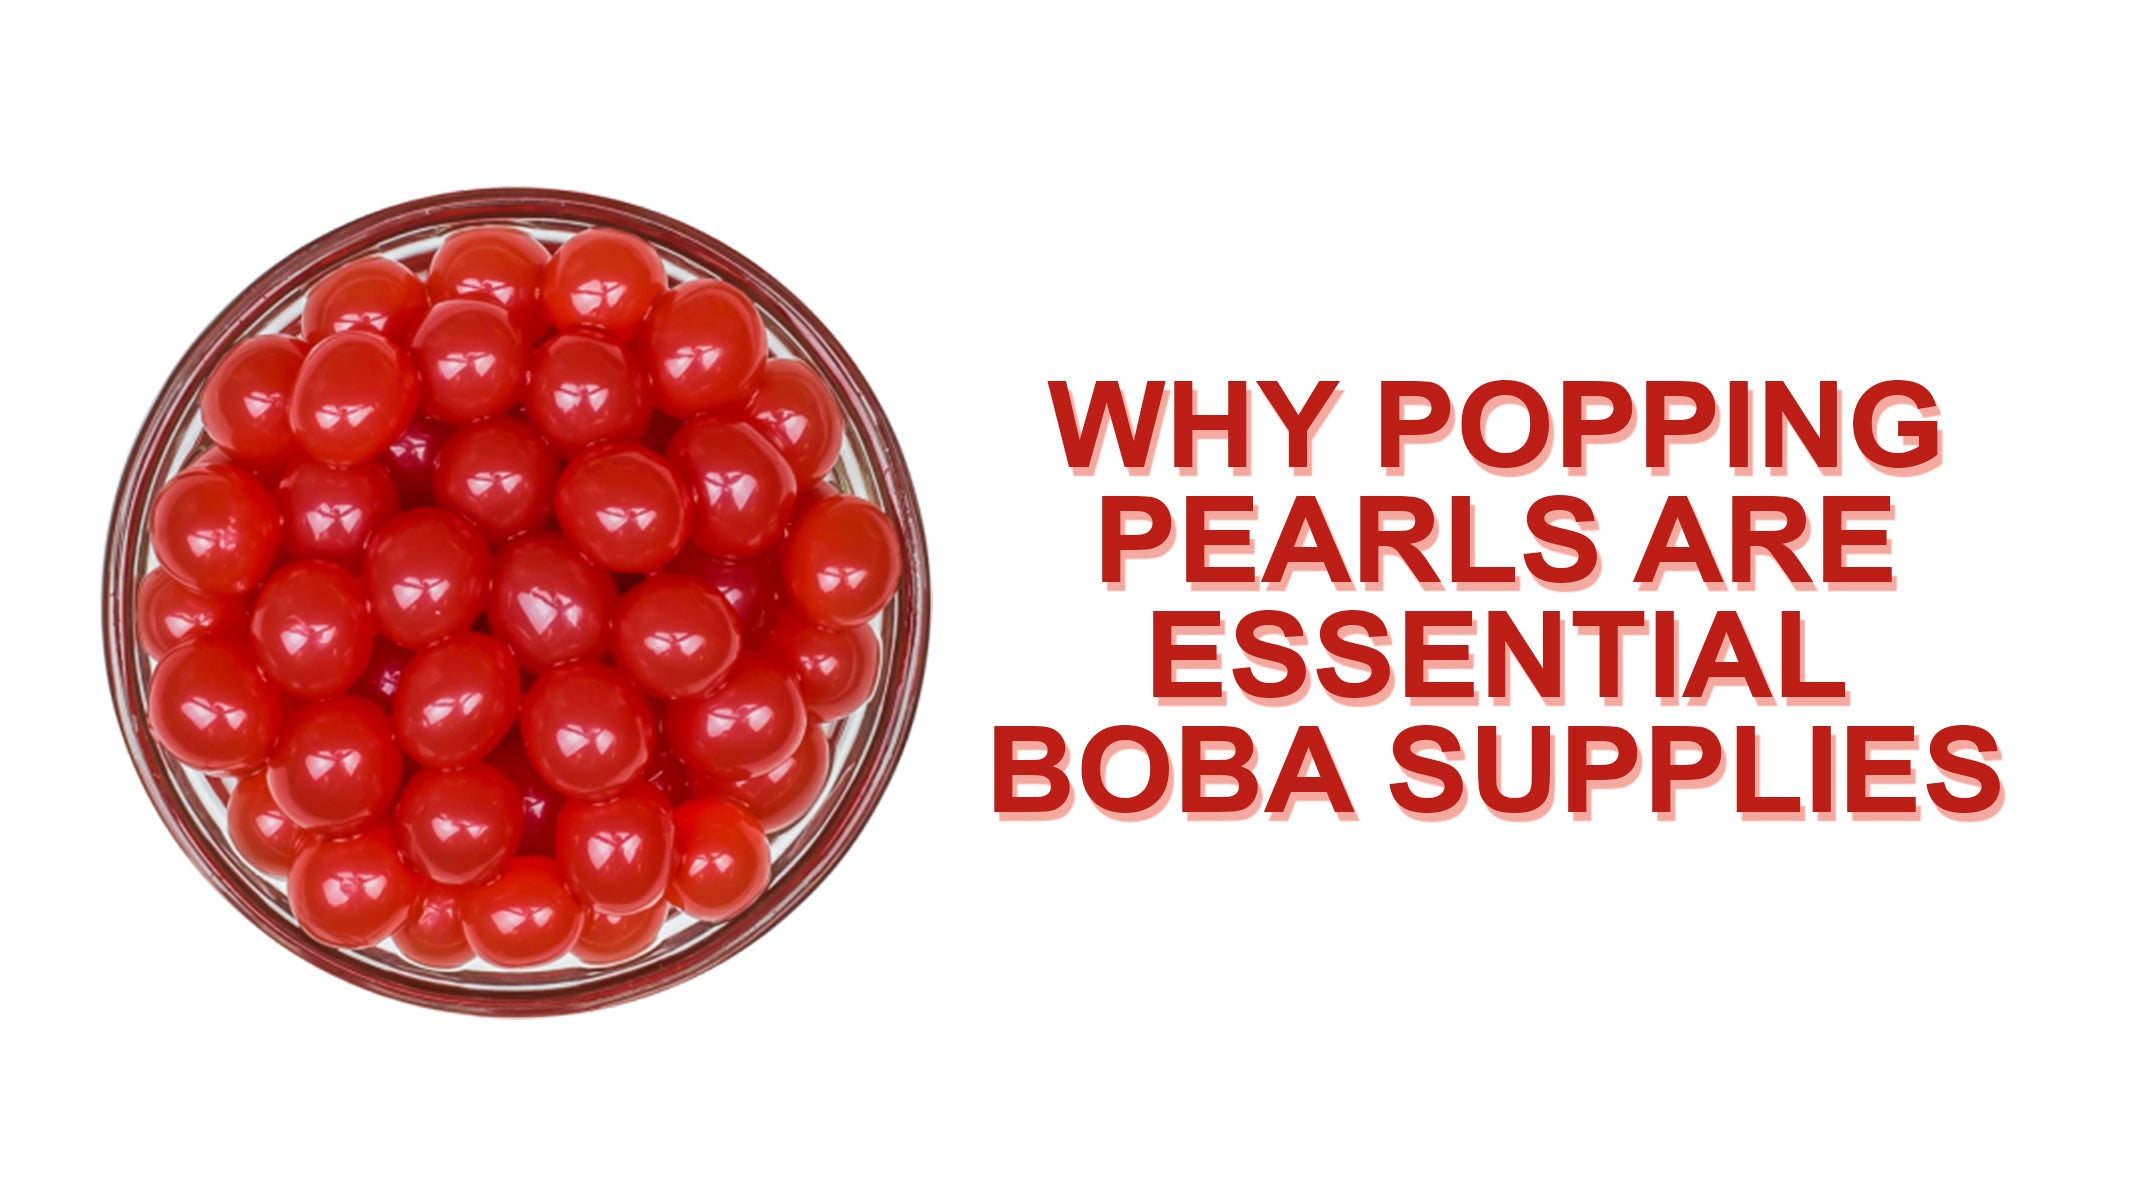 Why Popping Pearls Are Essential Boba Supplies